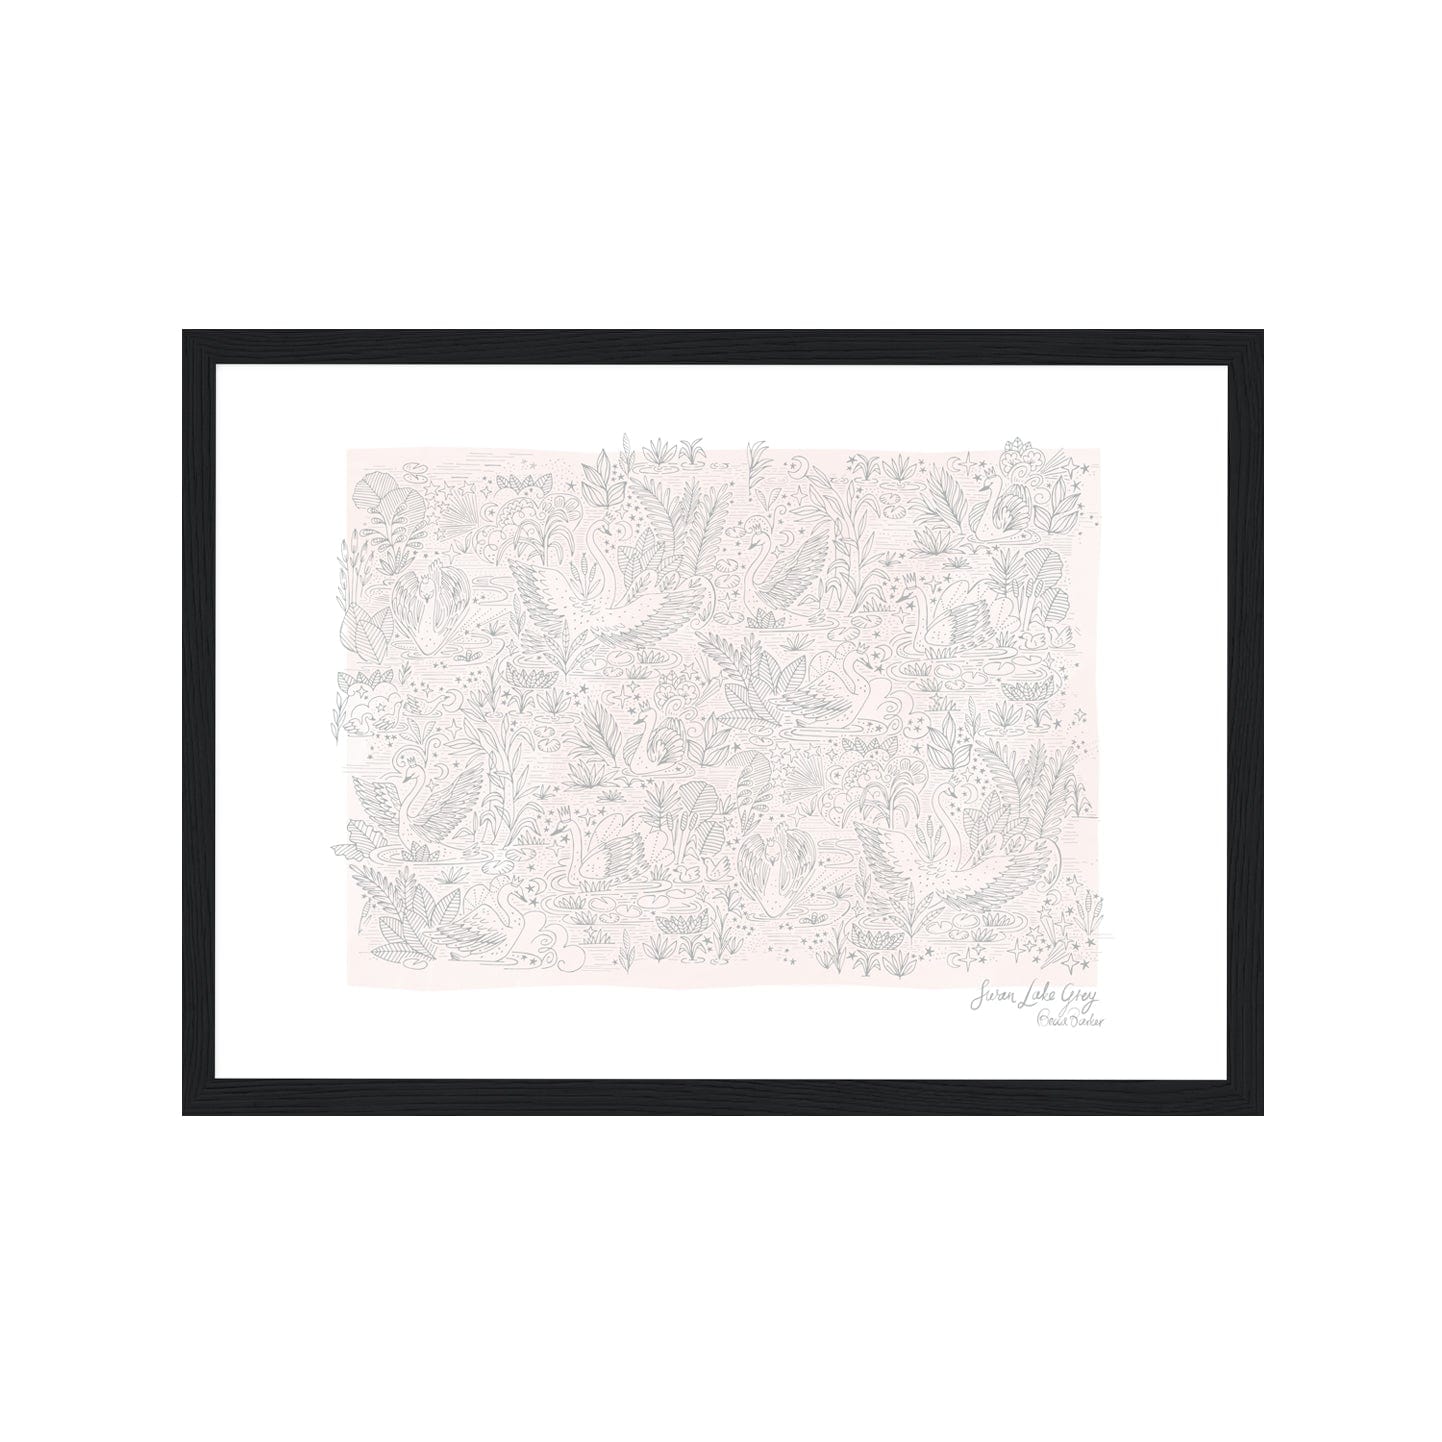 Art print in a black frame. Our swan lake grey art print features, fine grey lined drawing on a pale pink background. Showing detailed foliage, and elegant swans in small crowns gliding over a star filled lake.